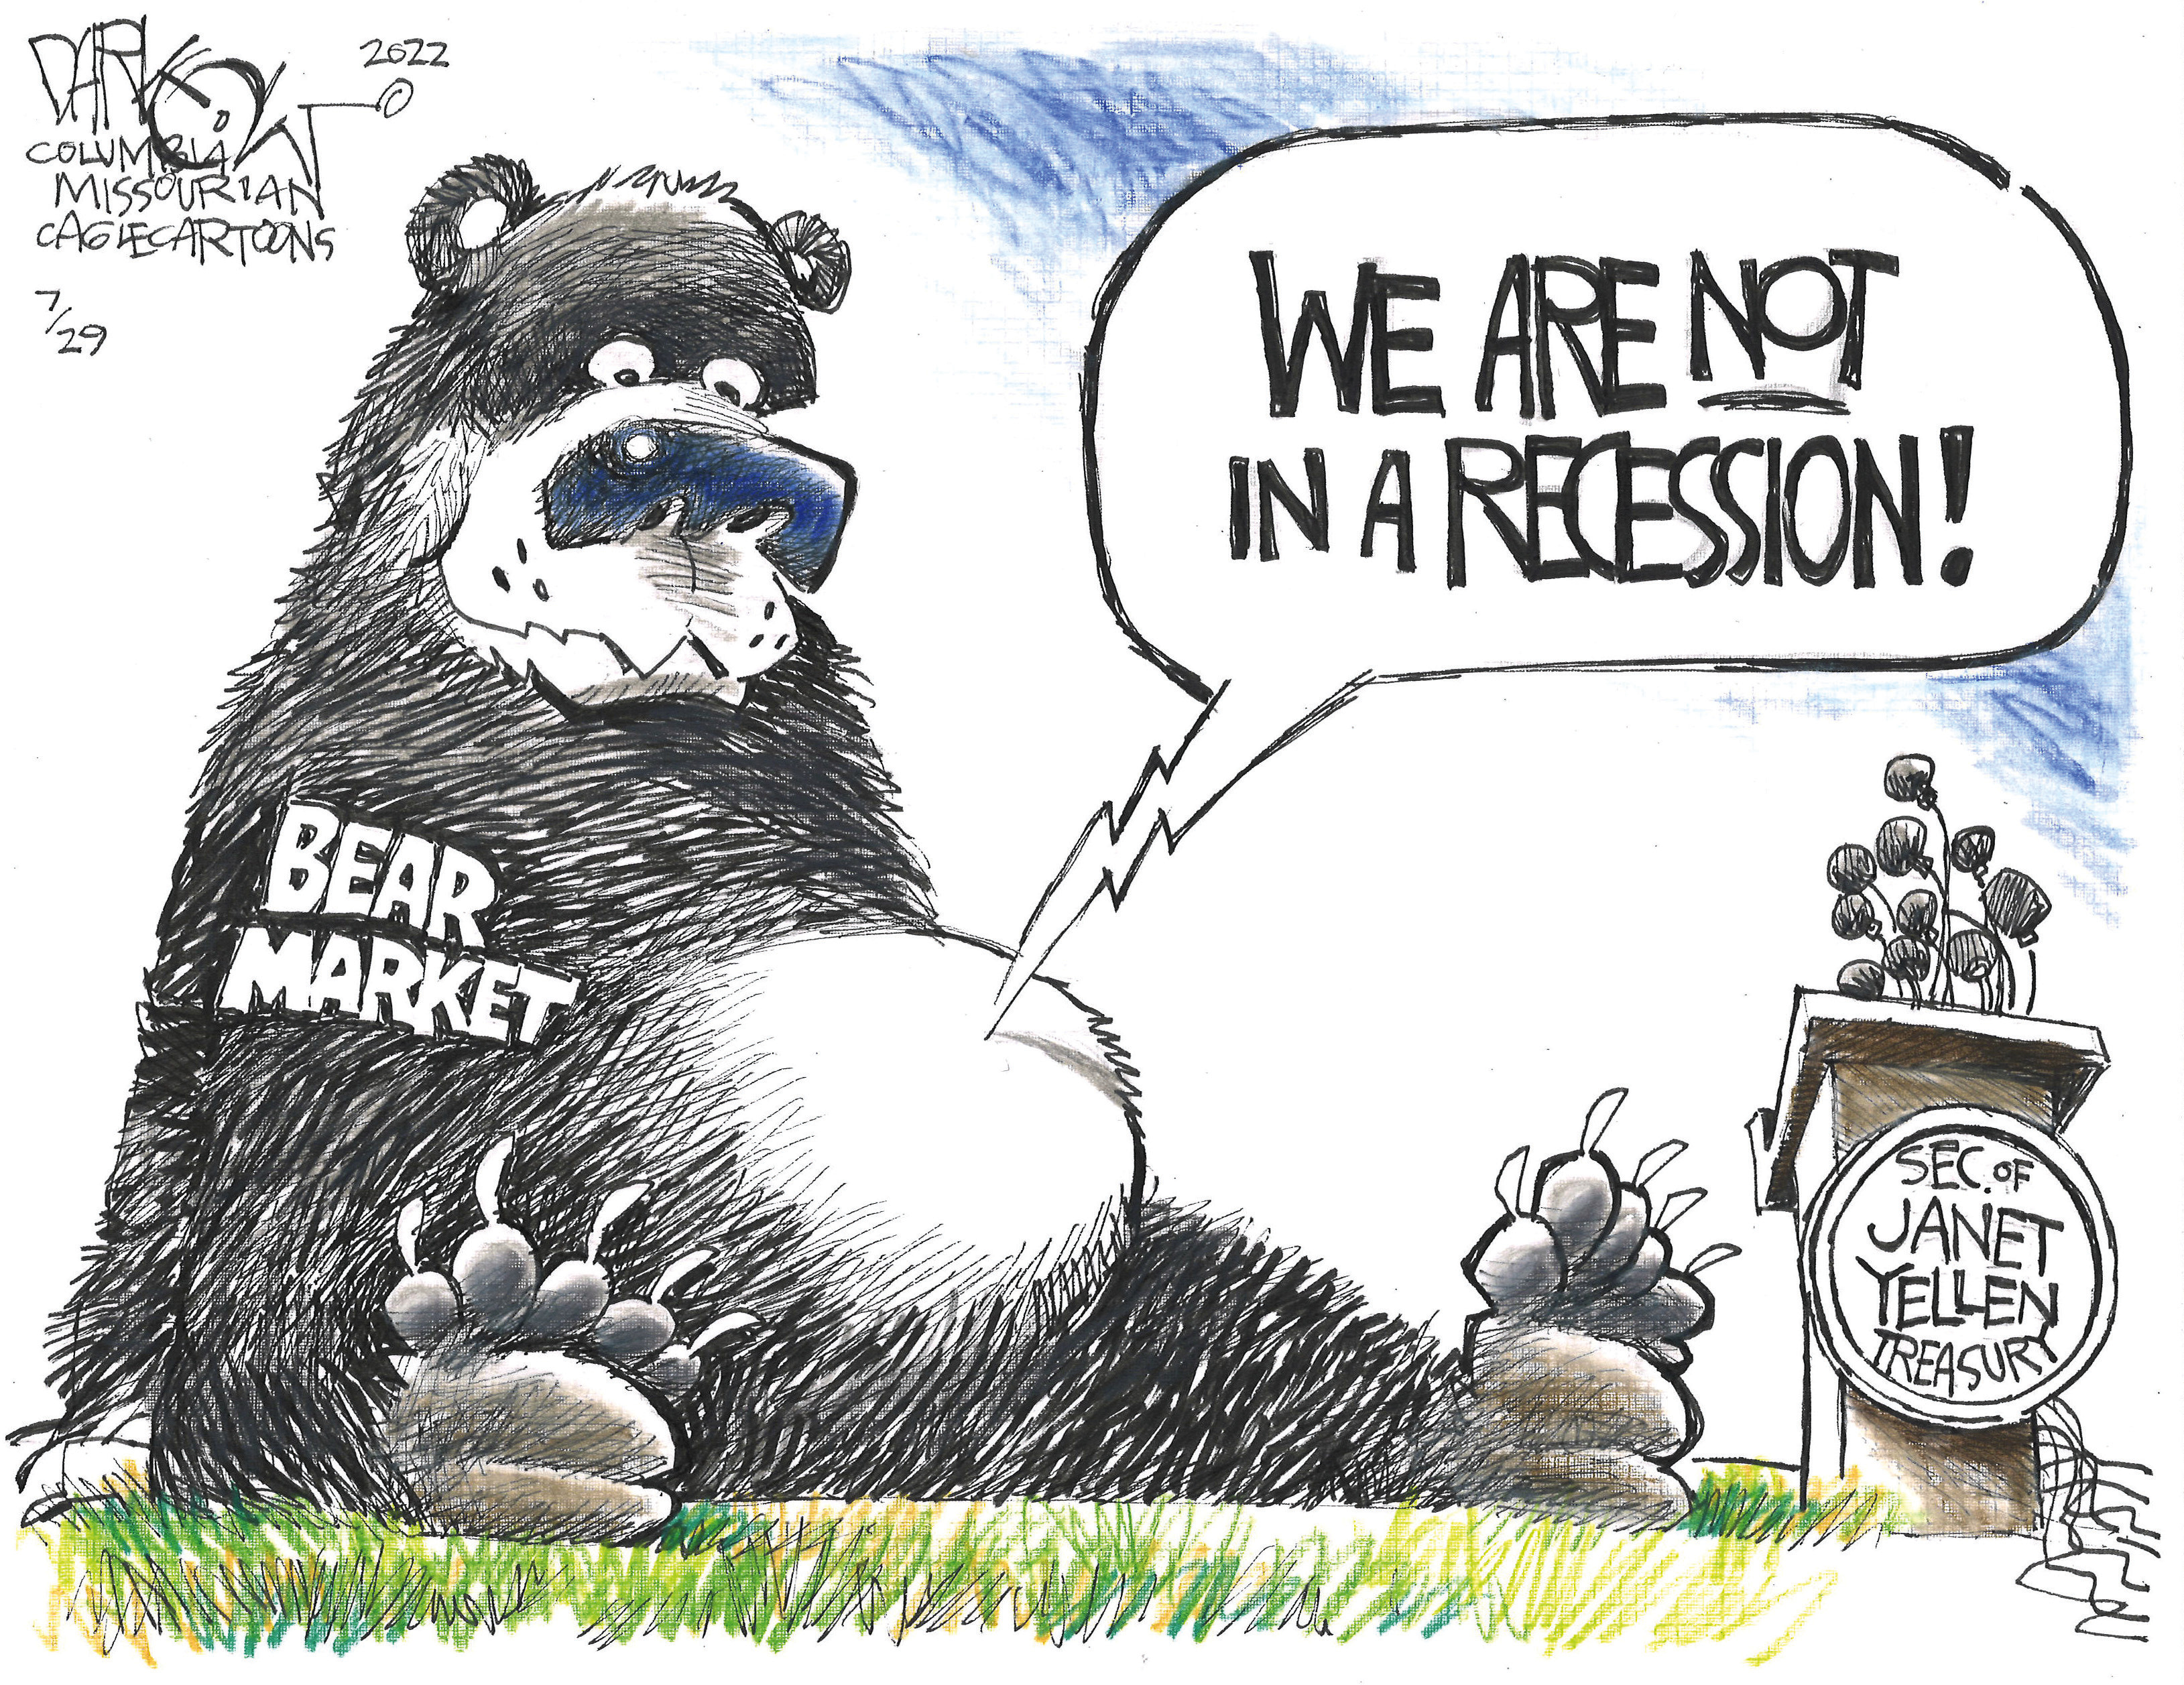 The bear is not a recession?